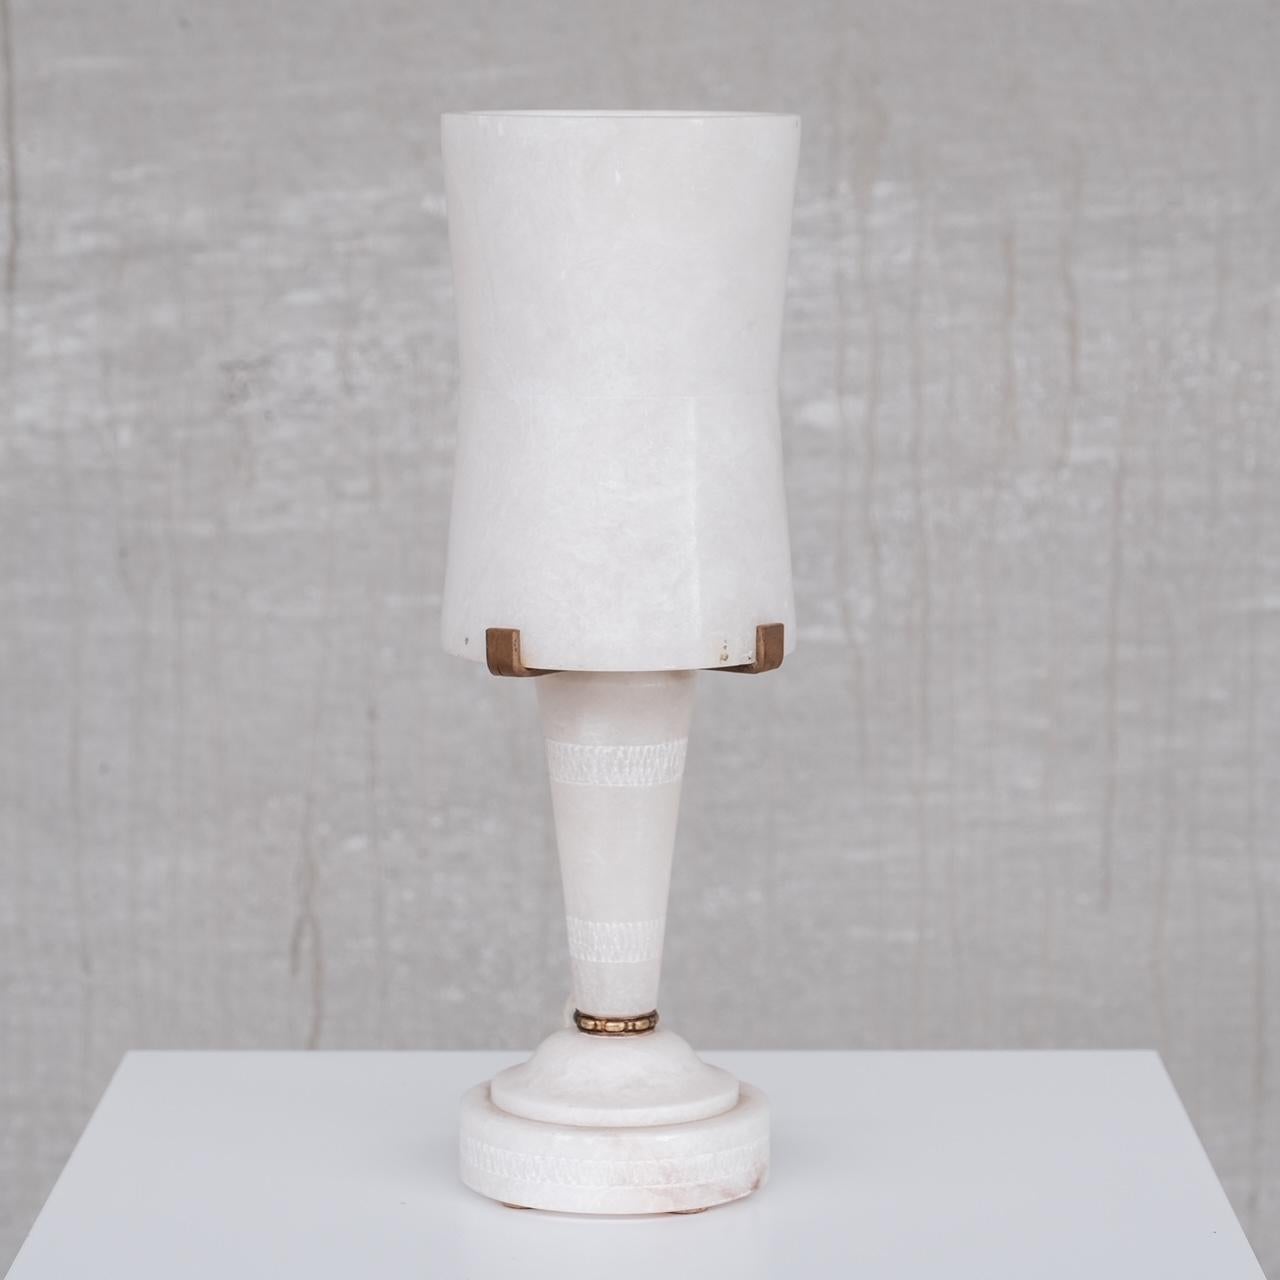 An alabaster table lamp.

France, c1950s.

Sourced in a cluster of seven varied style alabaster lamps.

Price is for the single lamp.

Some scuffs and wear commensurate with age but generally good condition.

Since re-wired and PAT